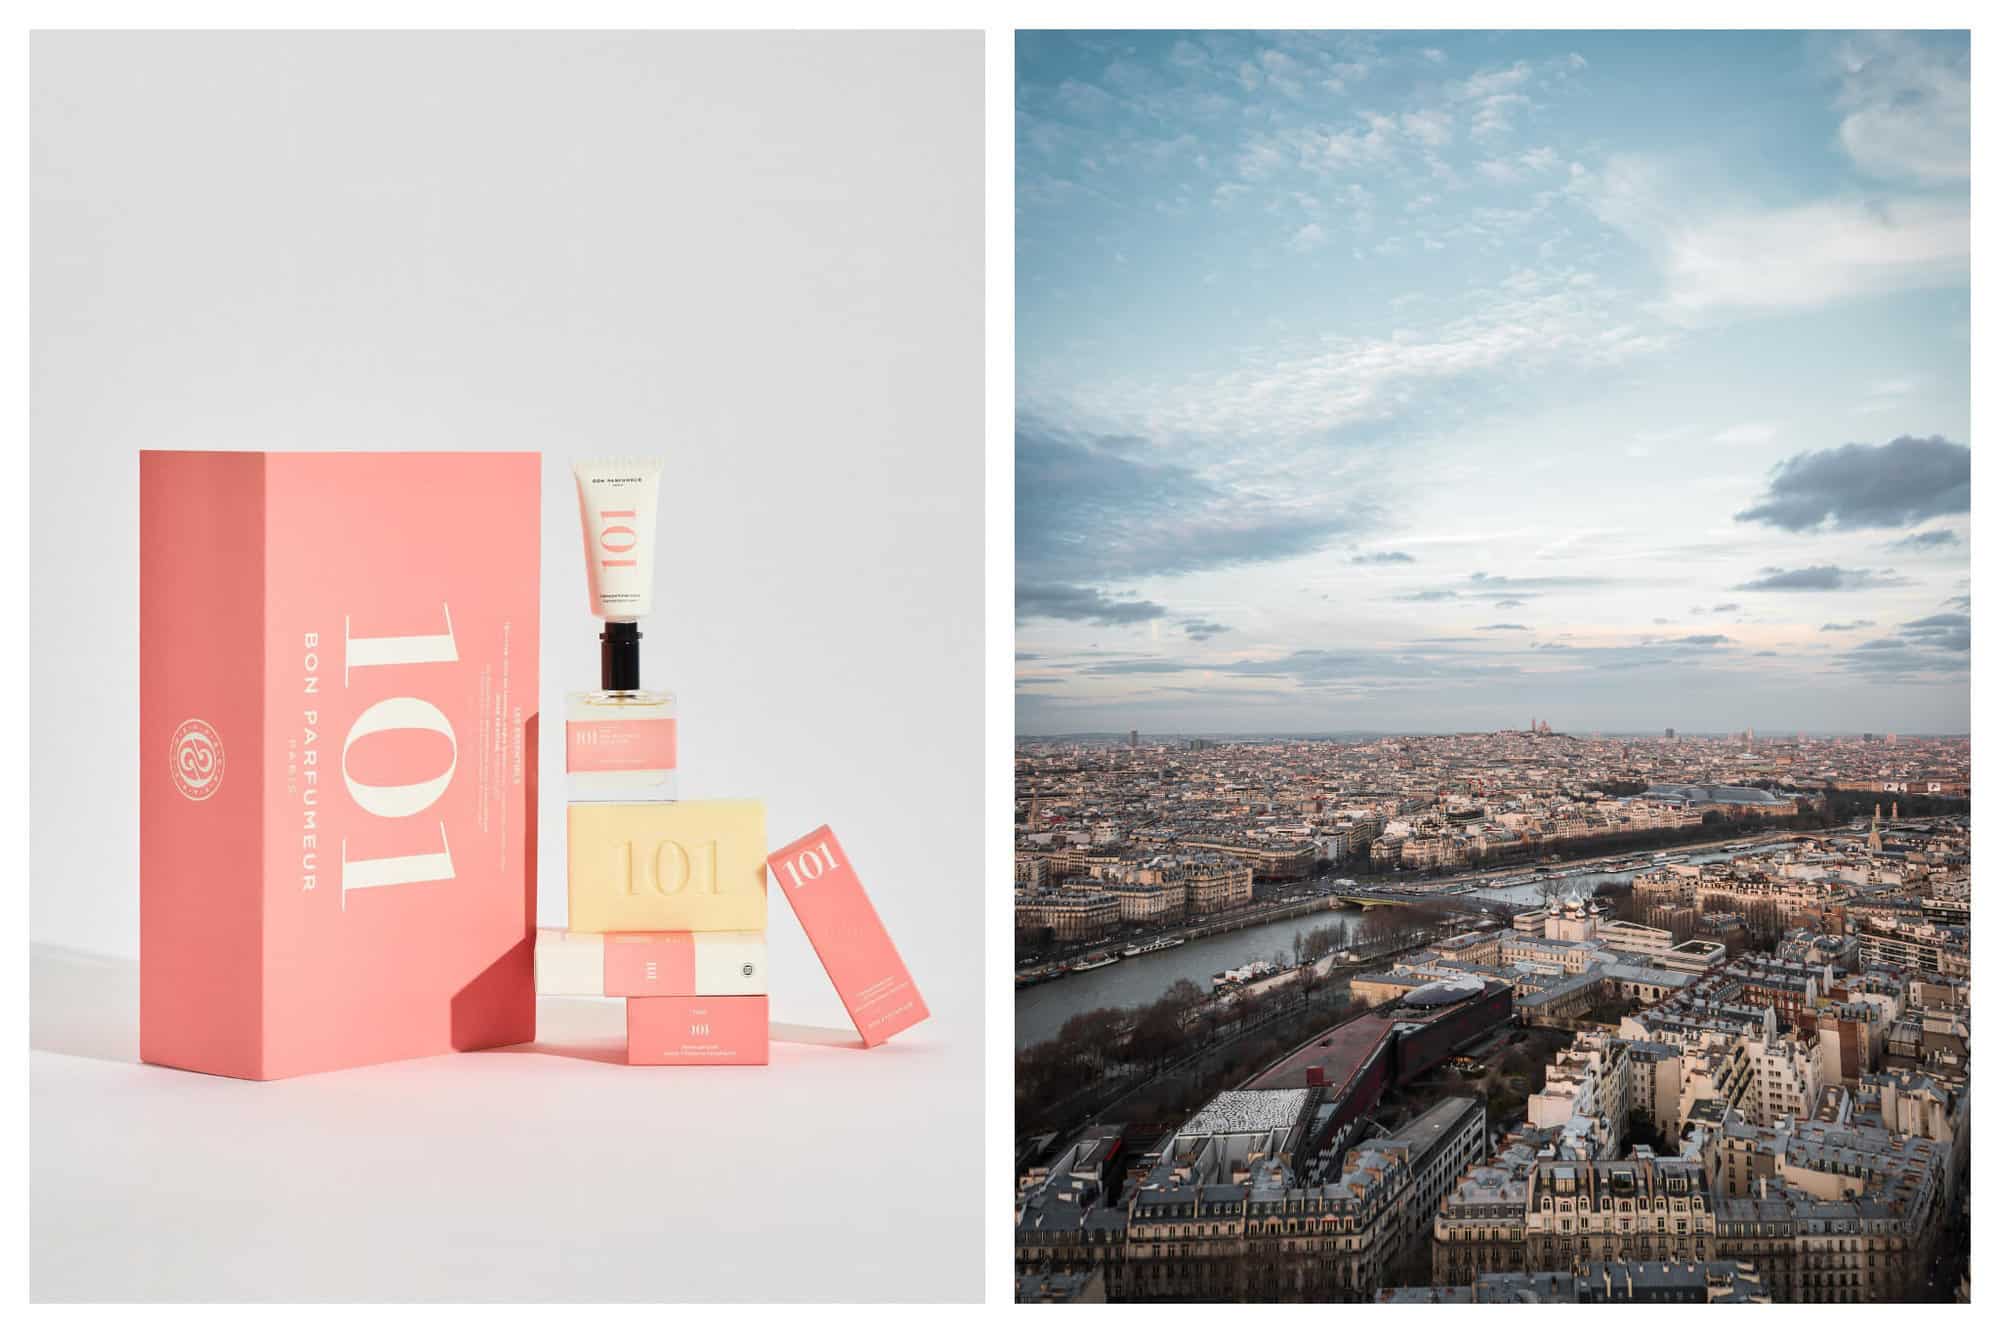 Left: various products by Bon Parfumeur. Right: a view over Paris at dusk, with the Parisian buildings, the Seine, and Sacre-Coeur in the background.